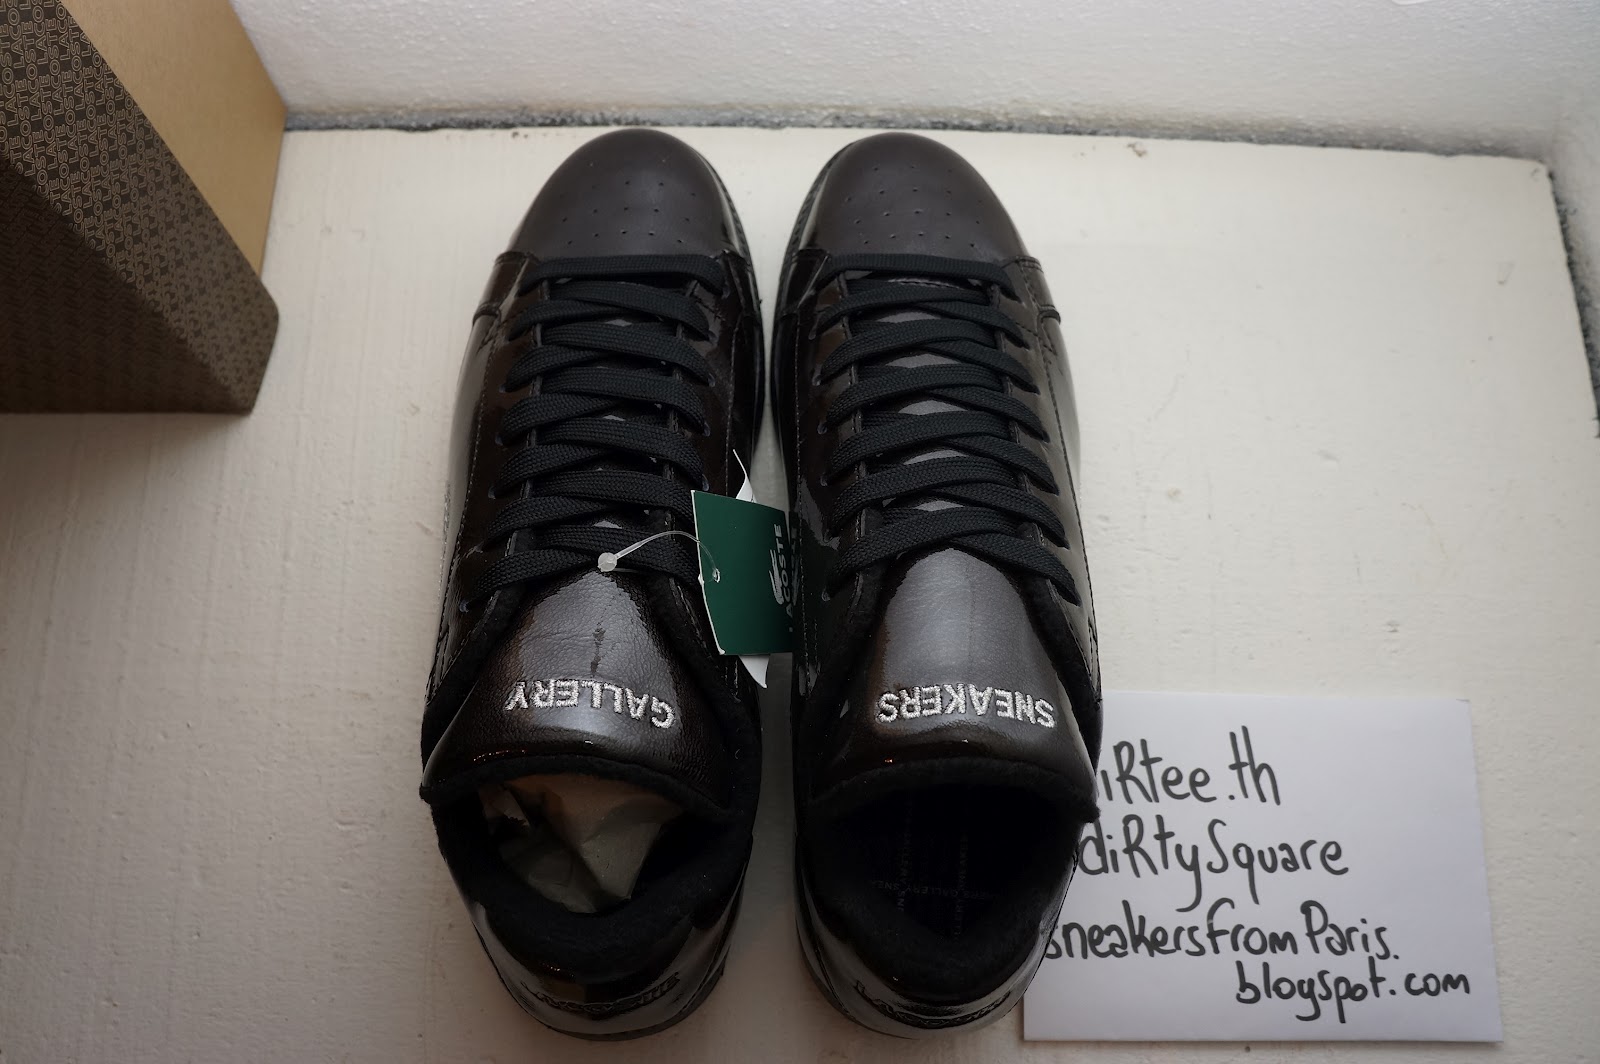 sneakers from Paris: LACOSTE - Graduate New Funk SG - Sneakers Gallery